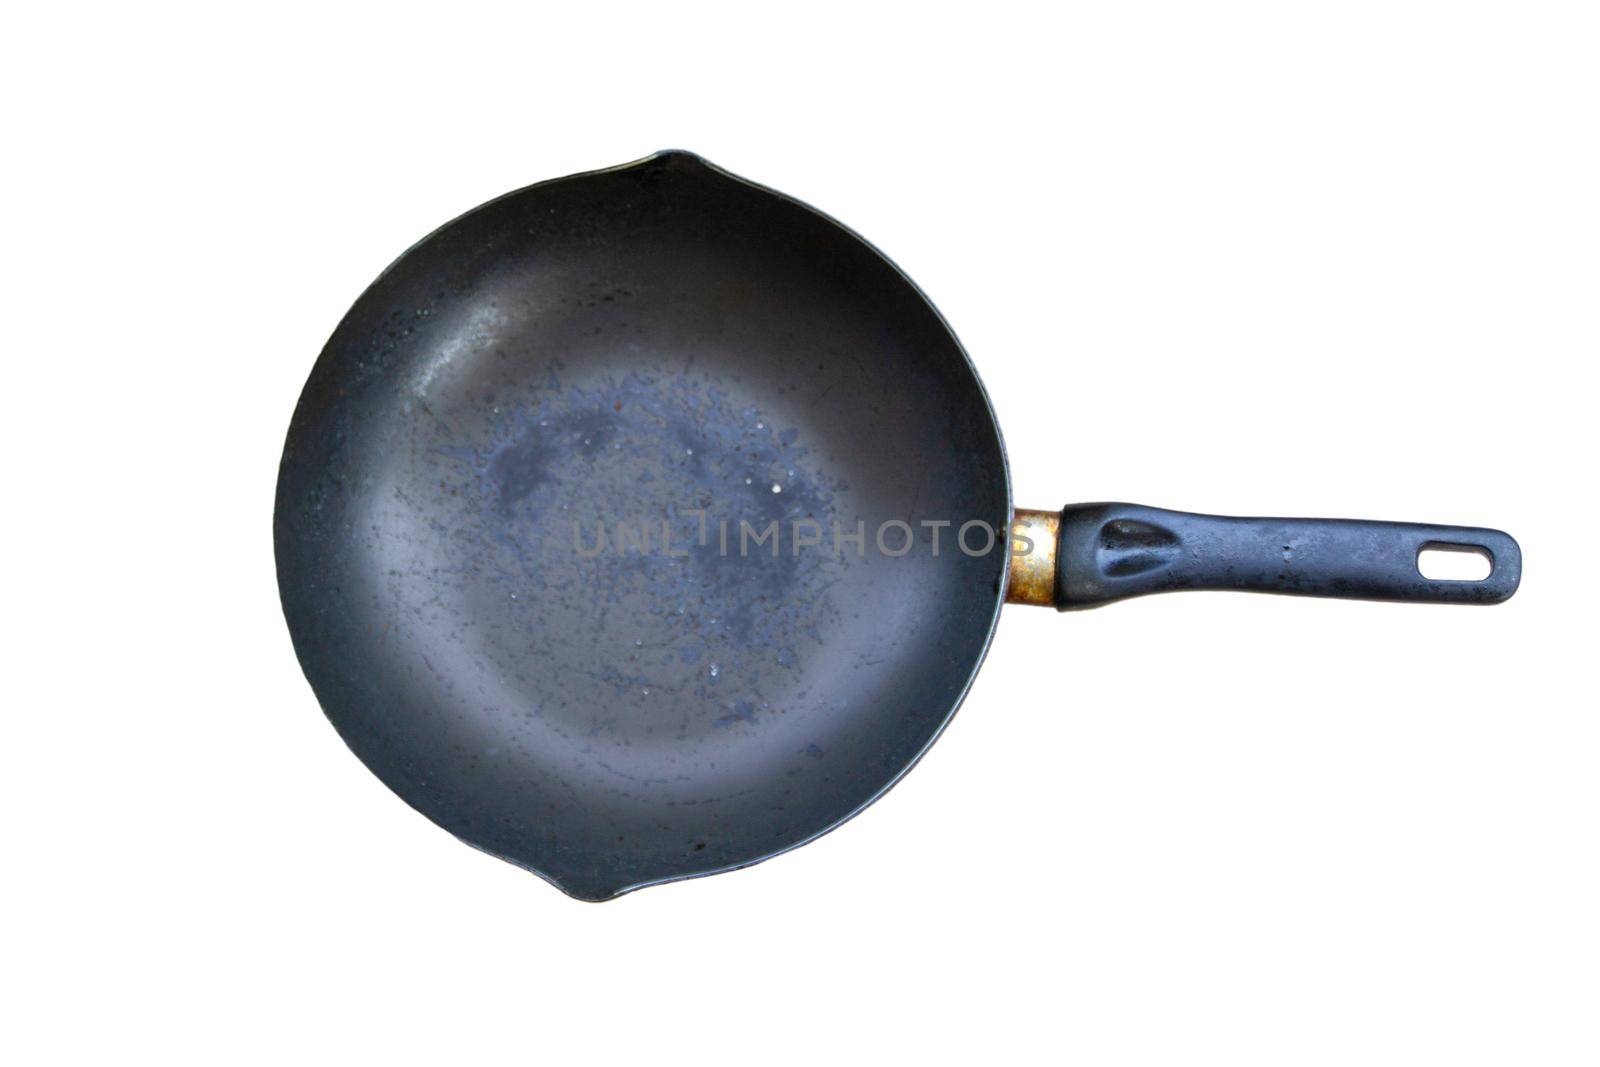 old black pan There are yellow stains on the handle. isolated on a white background